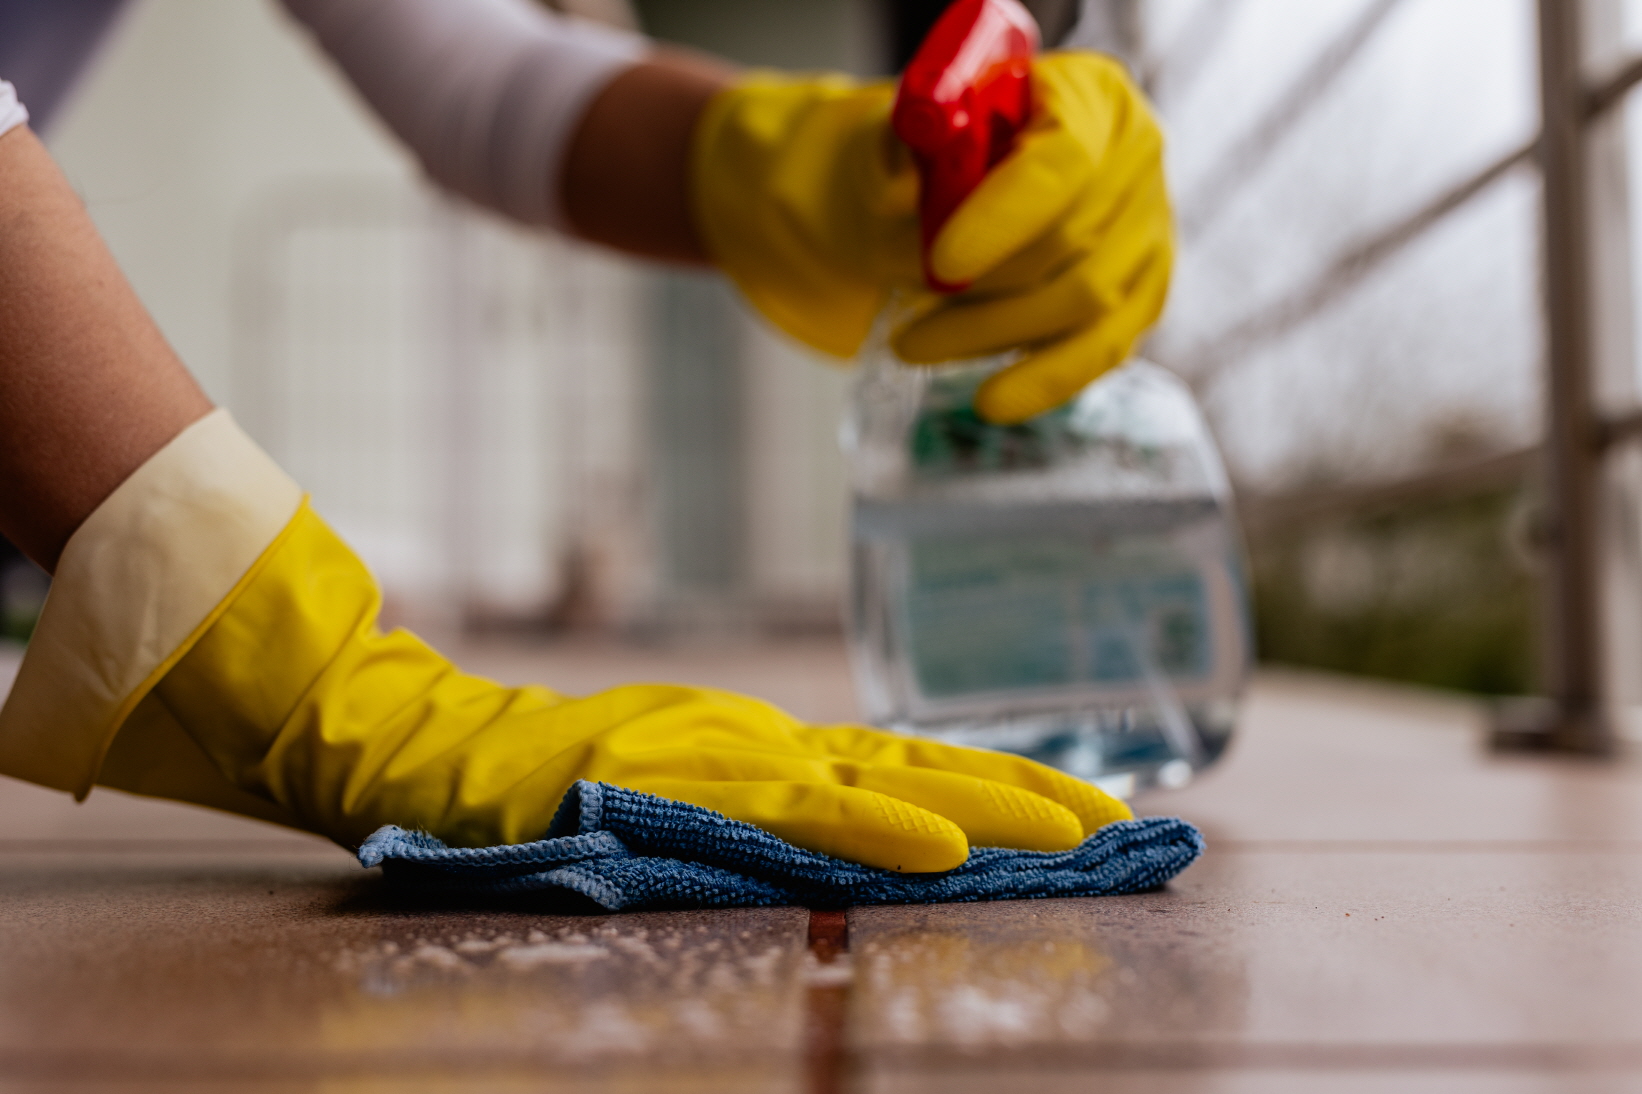 Mold remediation is another potential unexpected cost, which is crucial for mitigating health risks and preventing further damage.